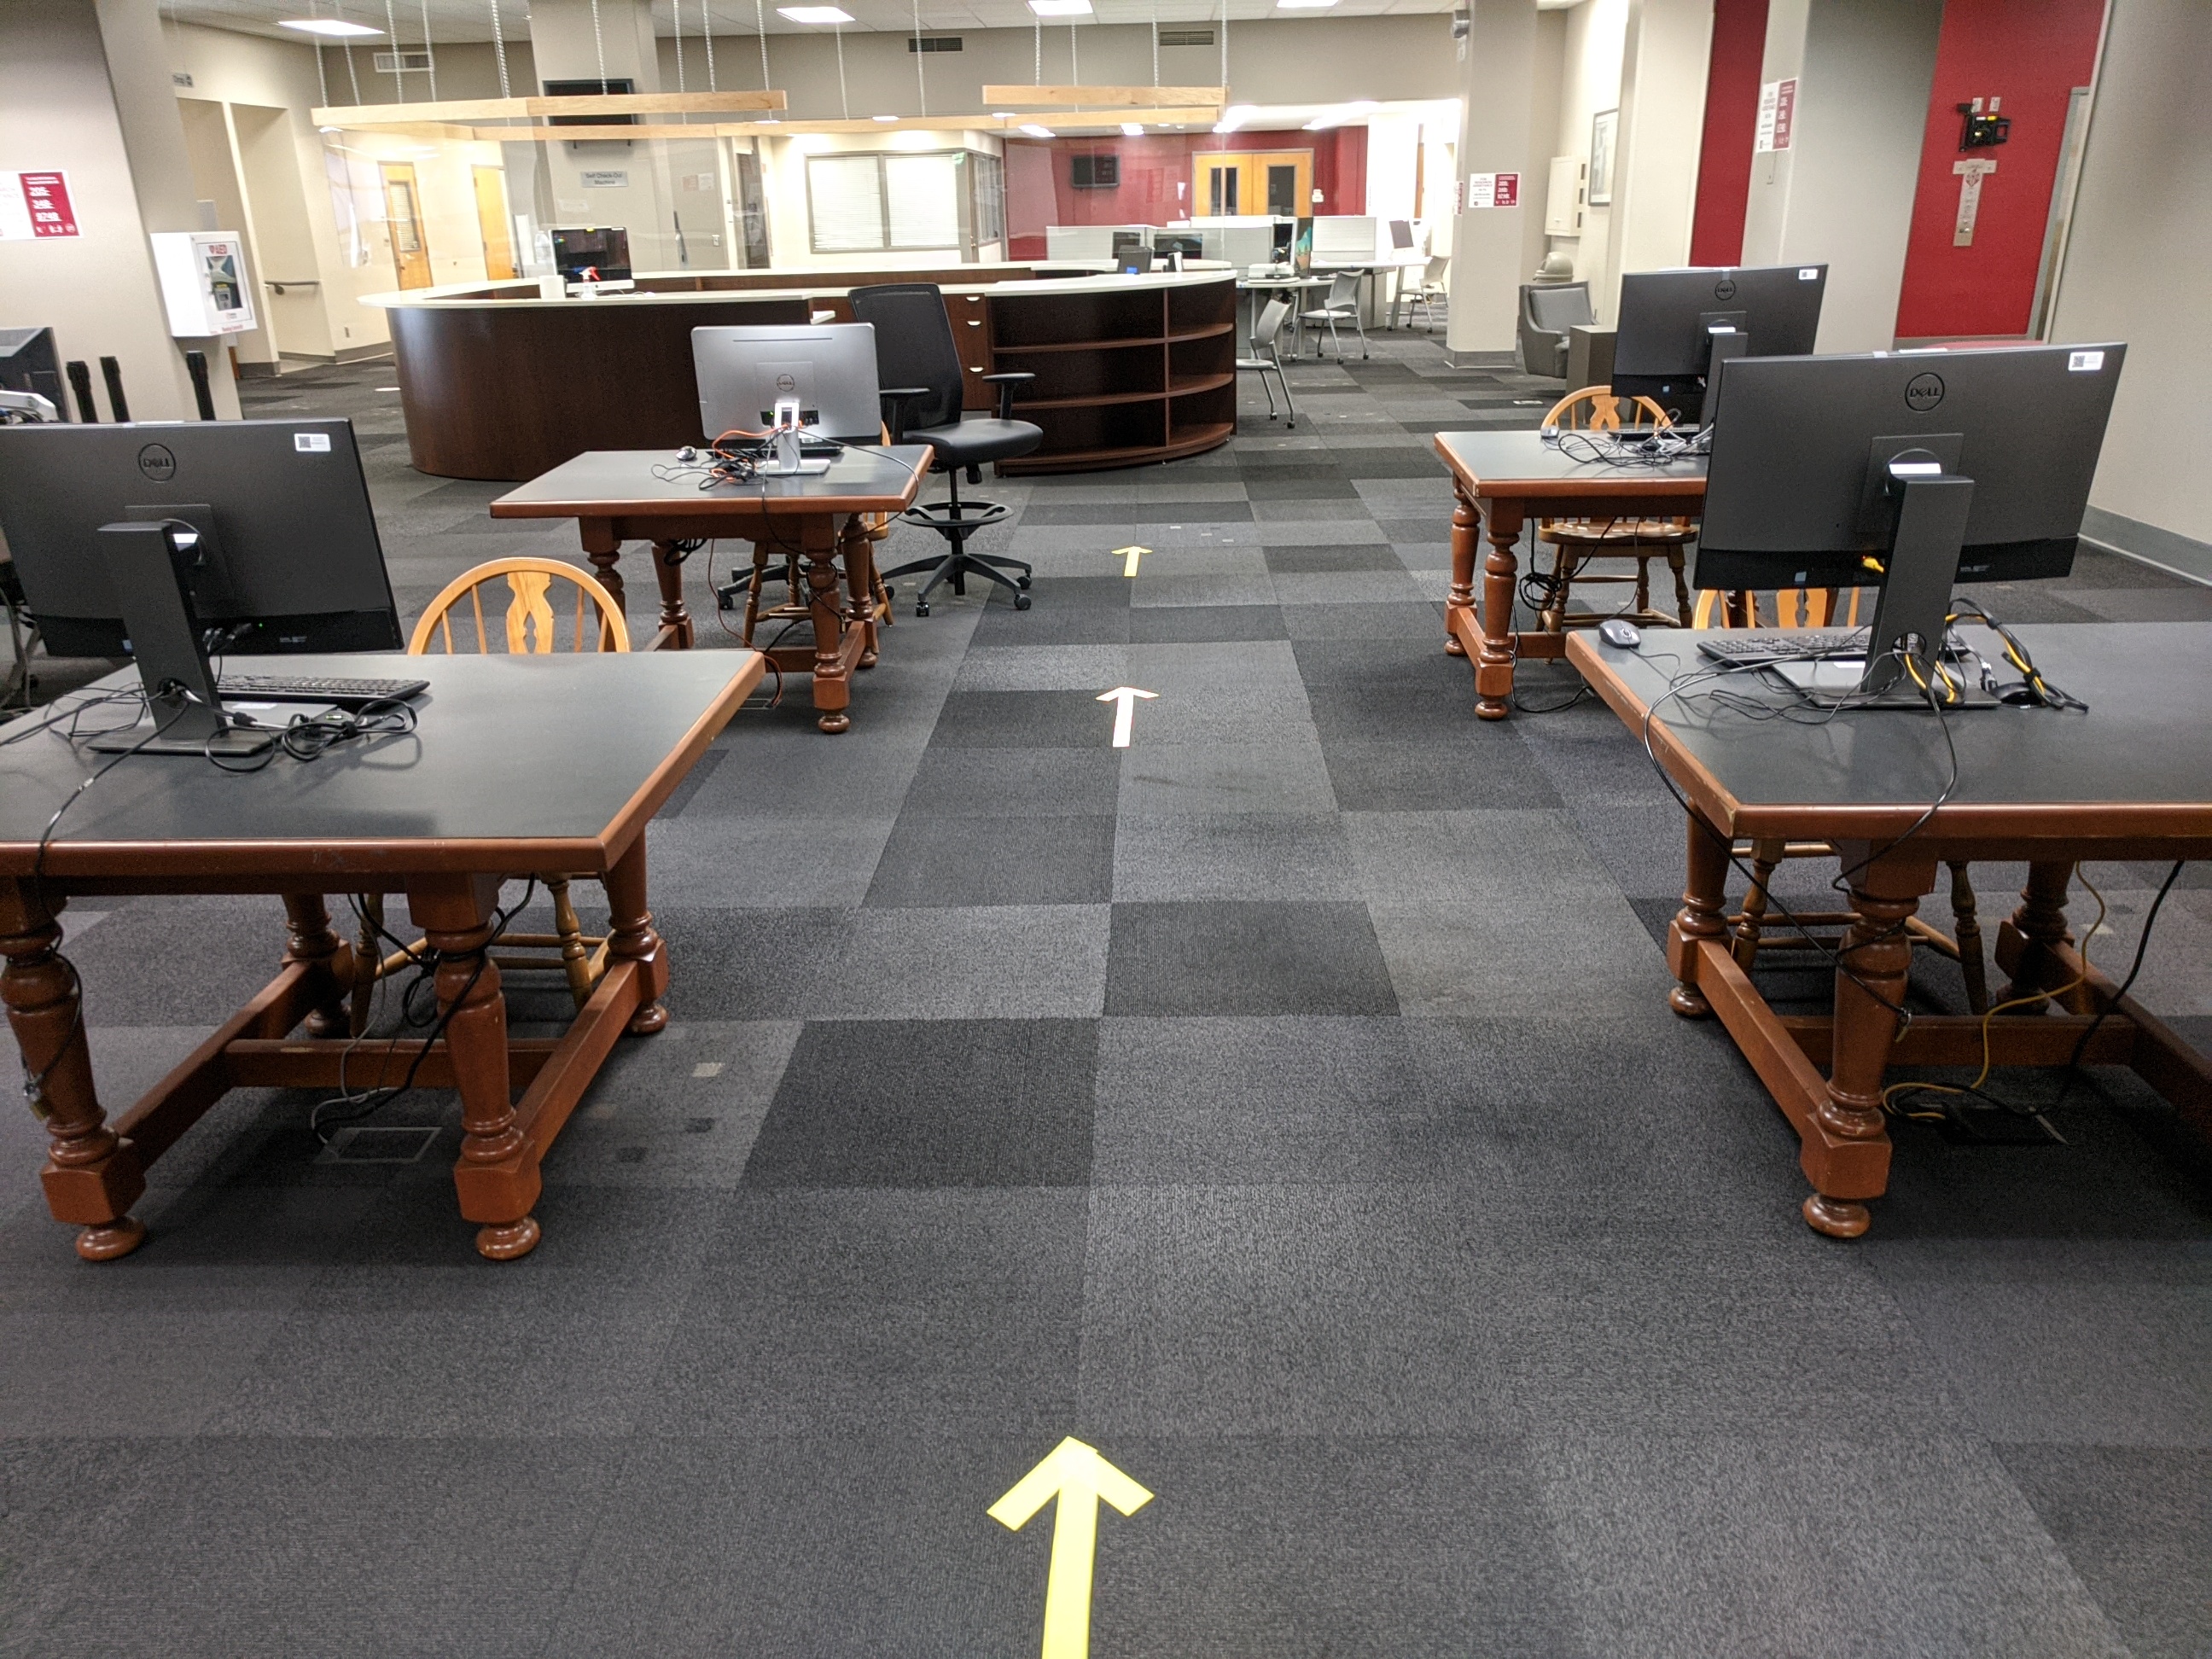 Arrows point out the direction that foot traffic in the libraries should follow